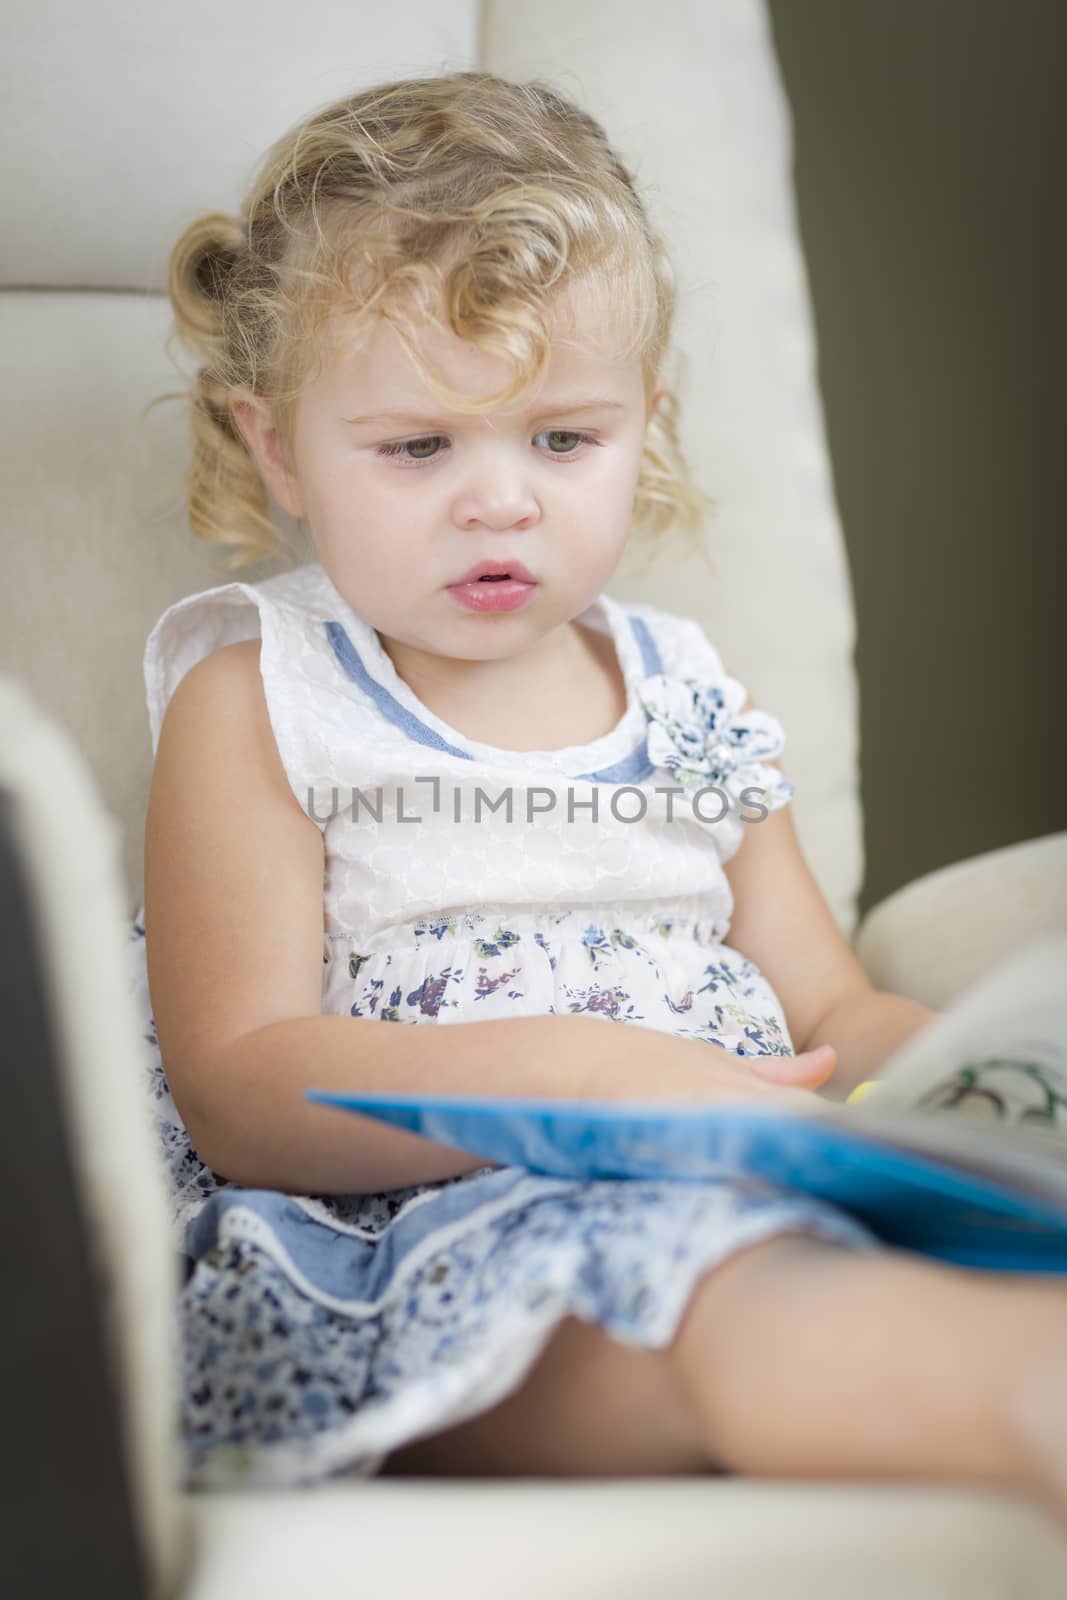 Adorable Blonde Haired Blue Eyed Little Girl Reading Her Book in the Chair.